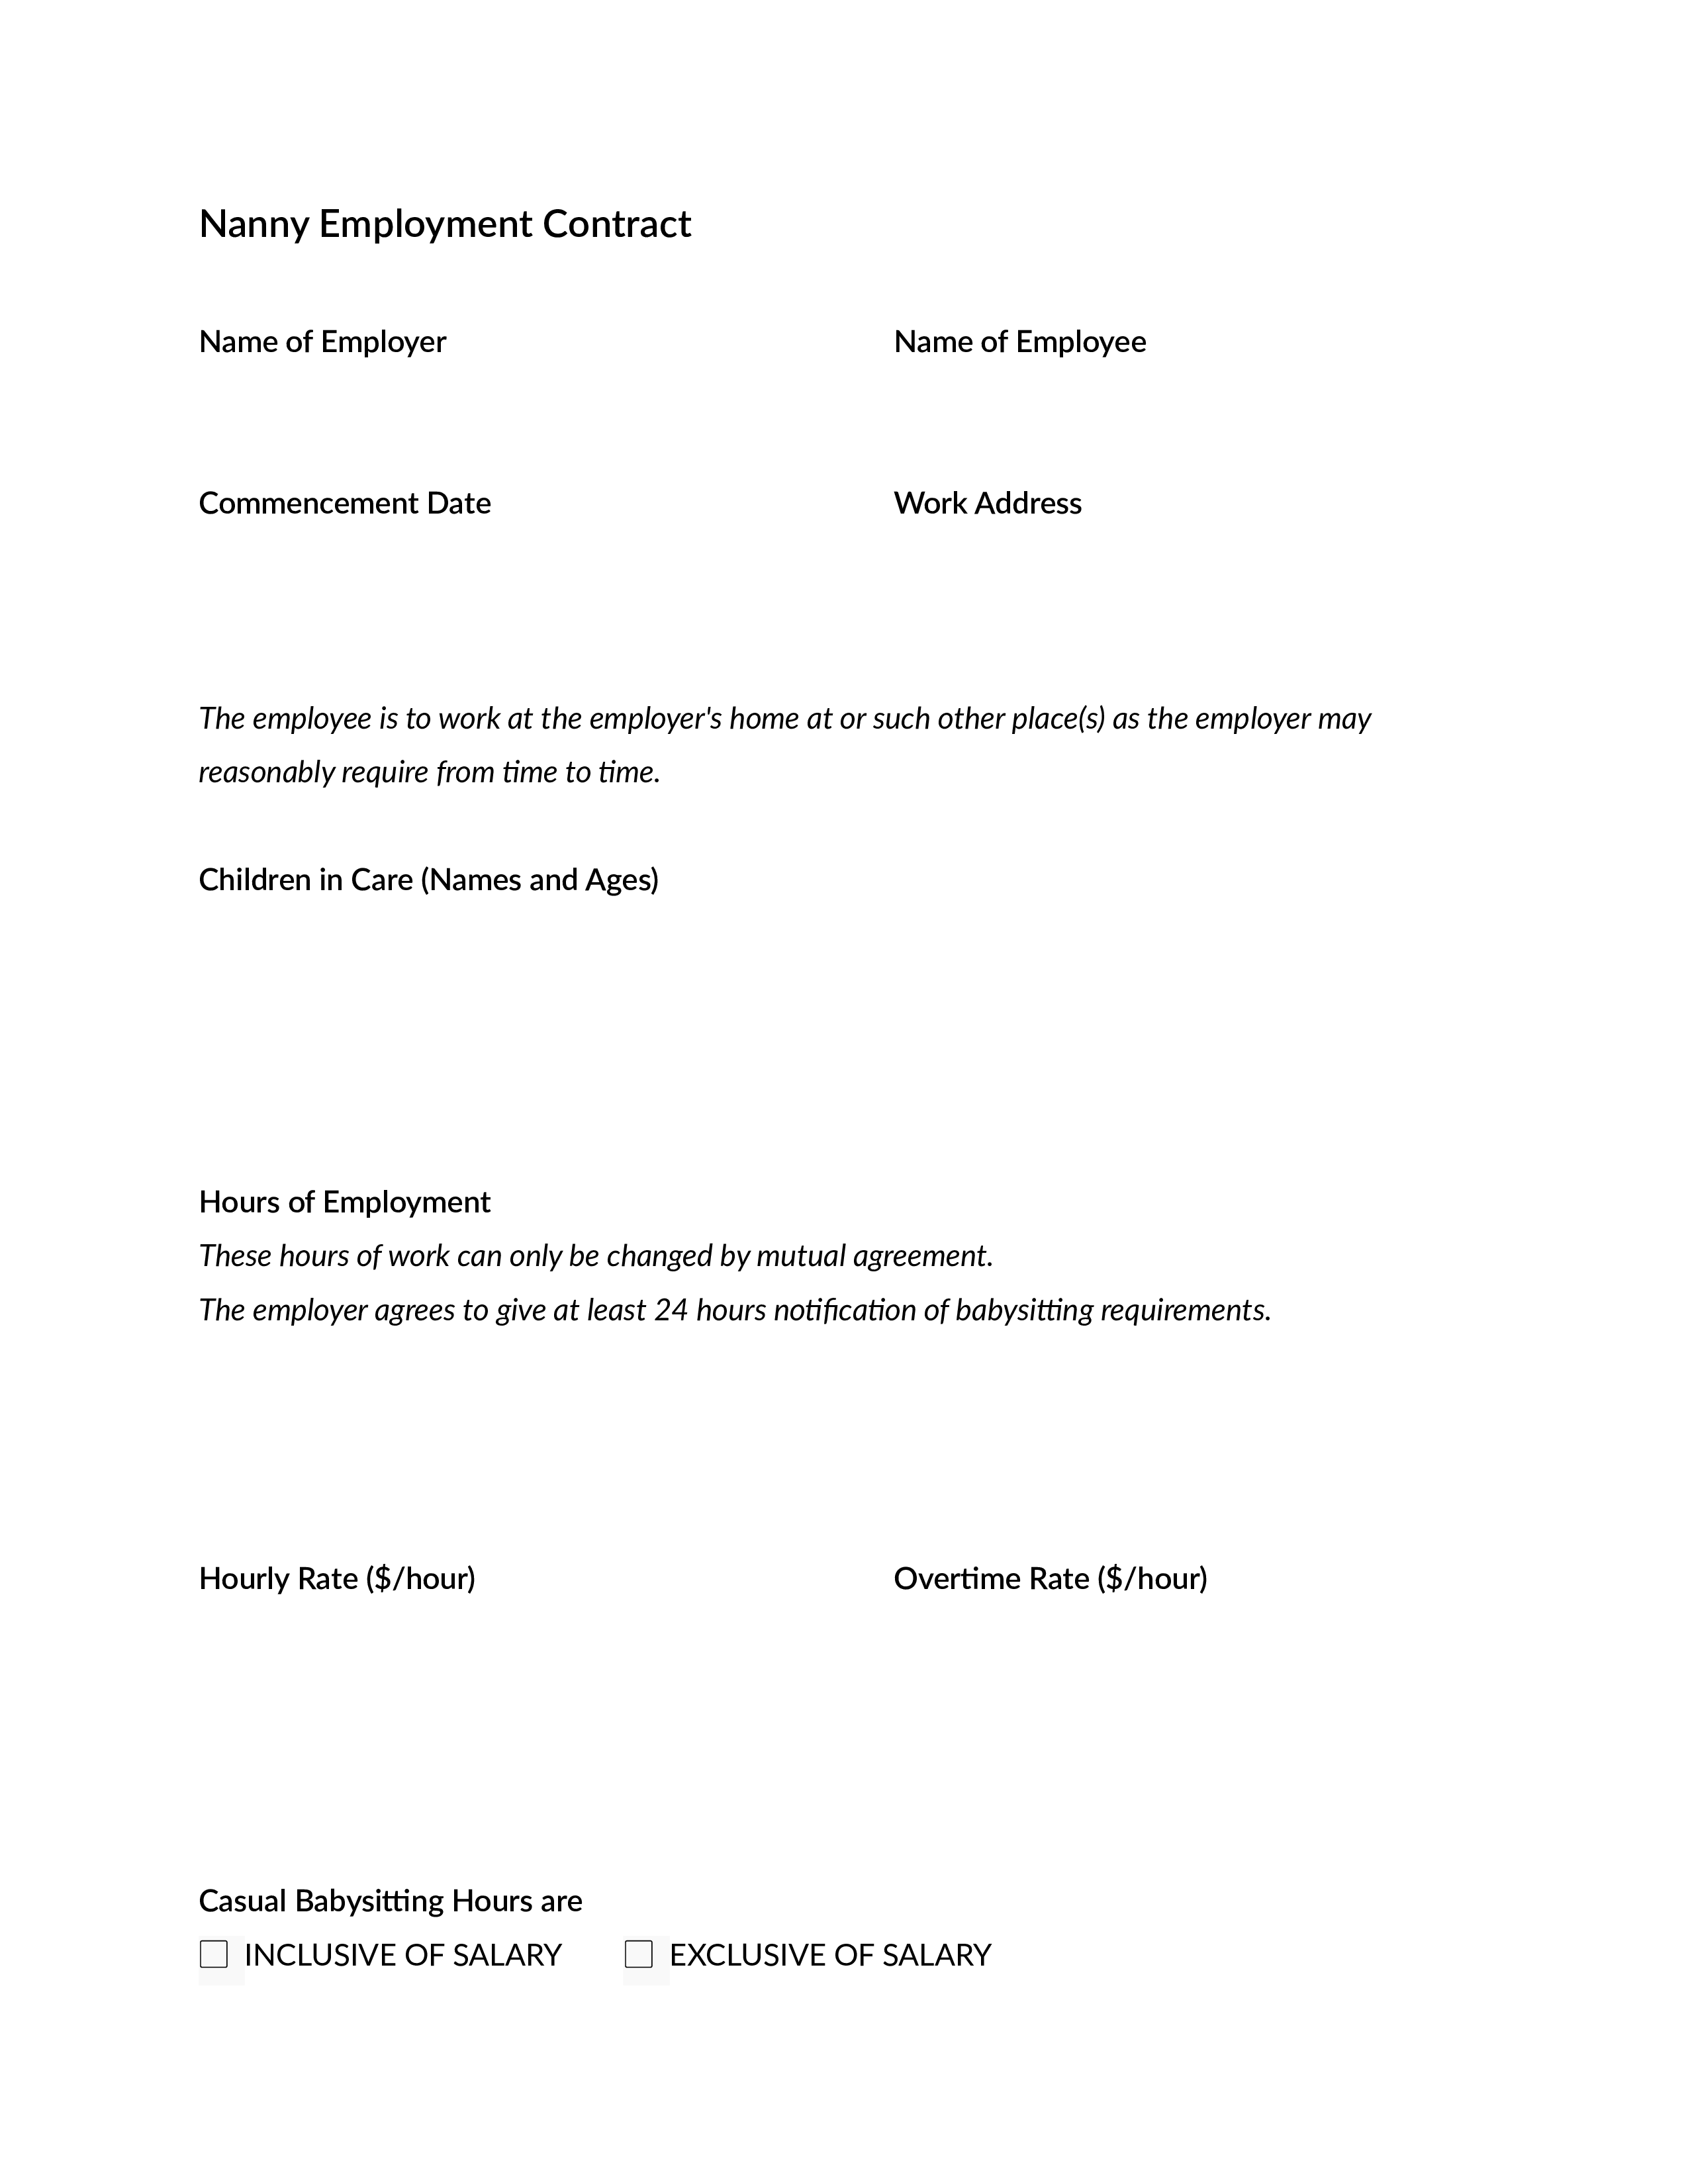 nanny employment contract example template